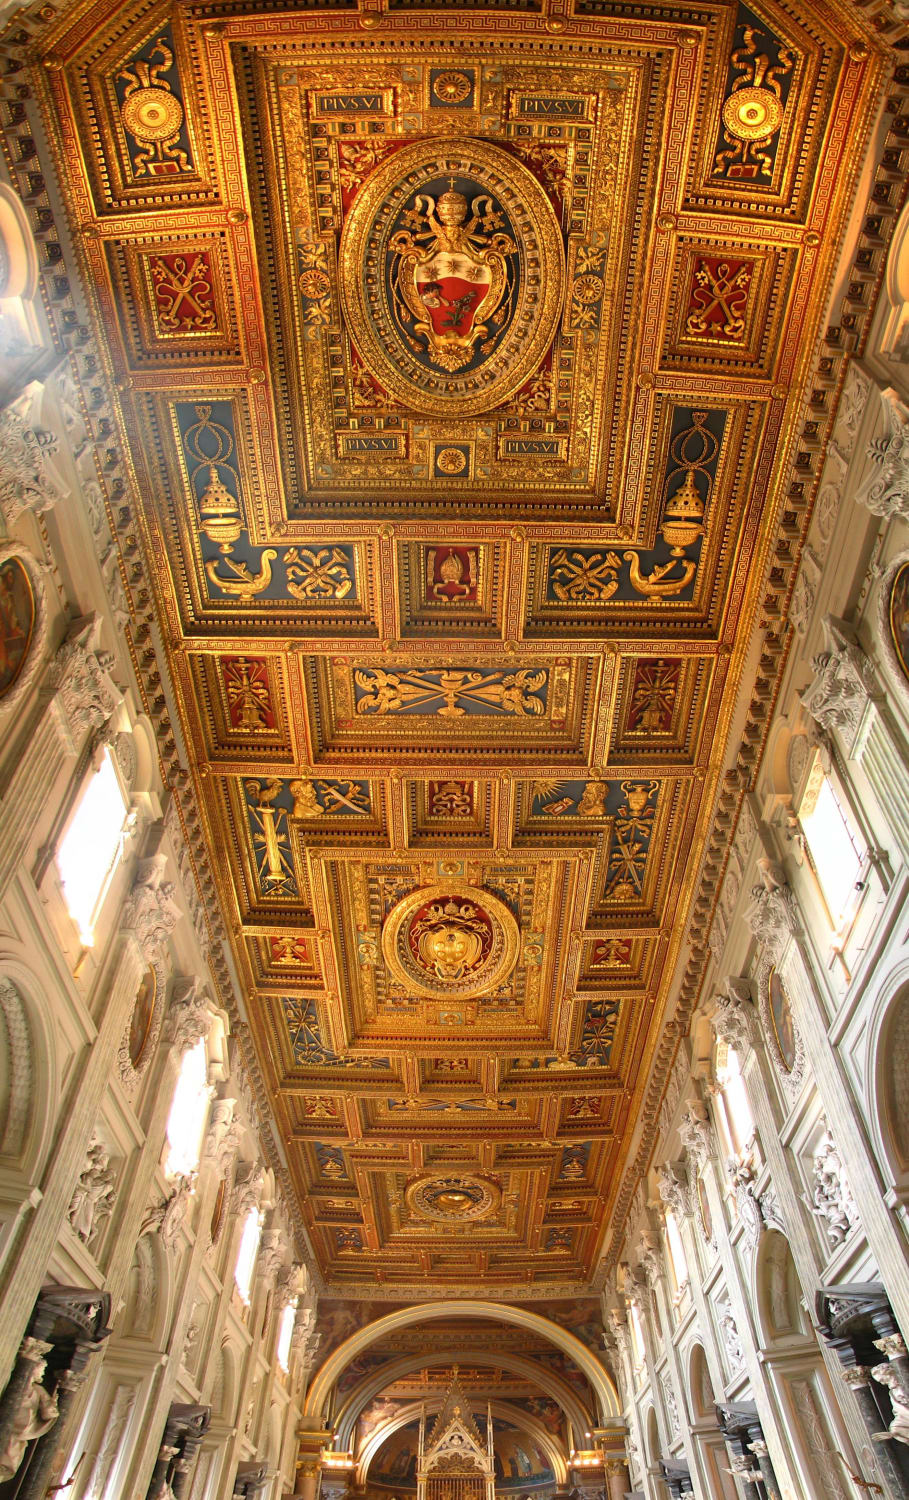 The decorated ceiling of the Papal Archbasilica of Saint John Lateran in Rome, Italy.